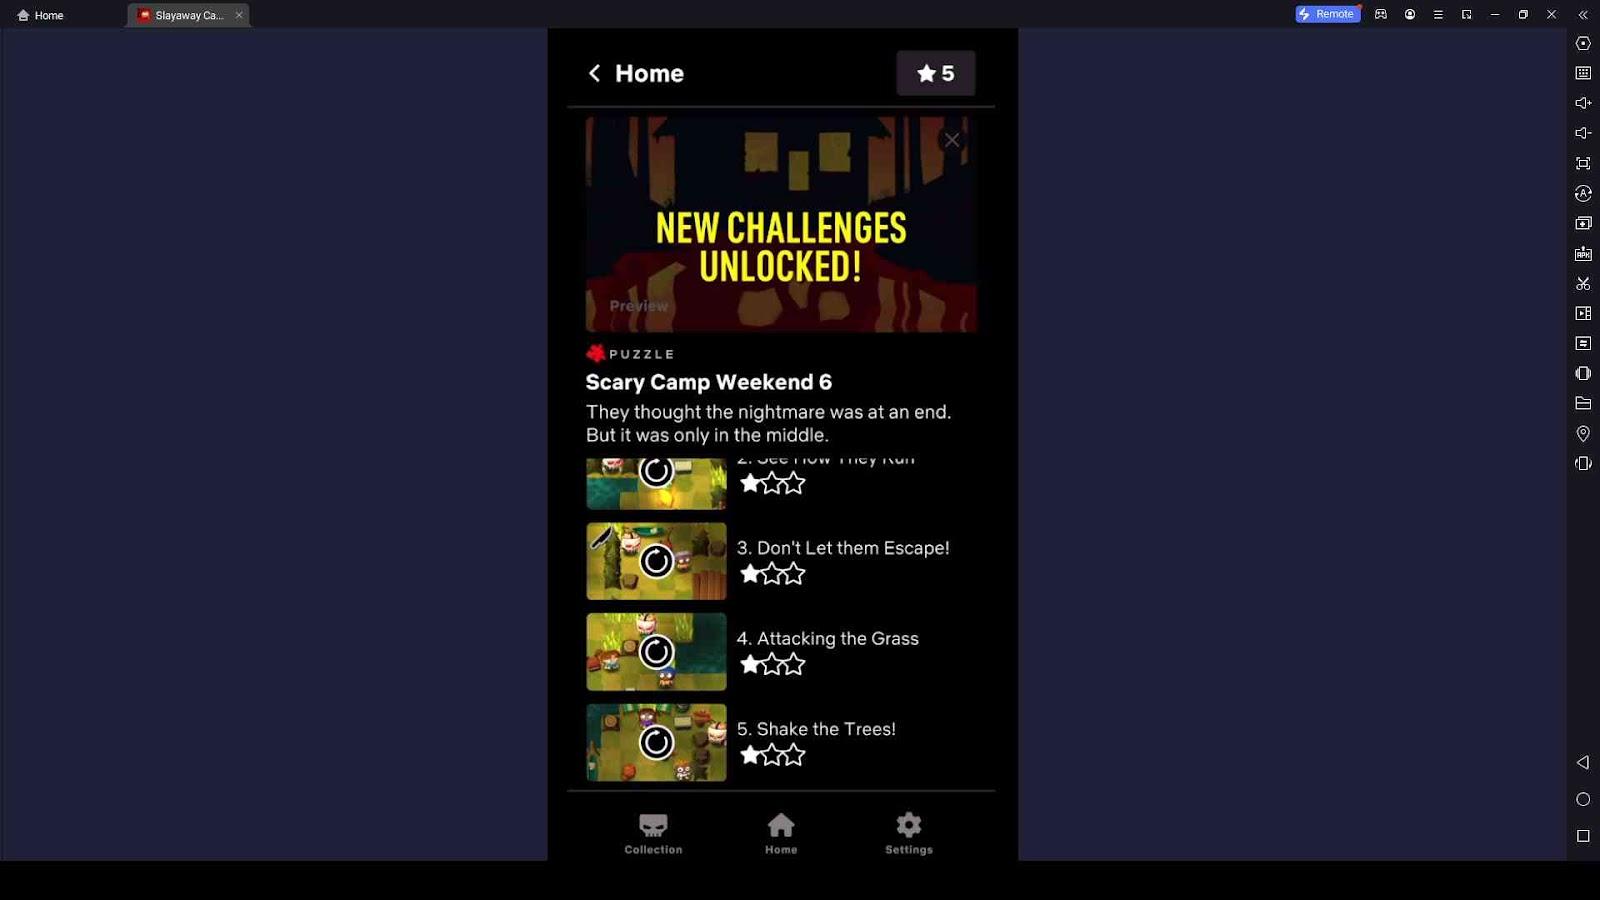 Complete Challenges and Unlock Higher Level Challenges